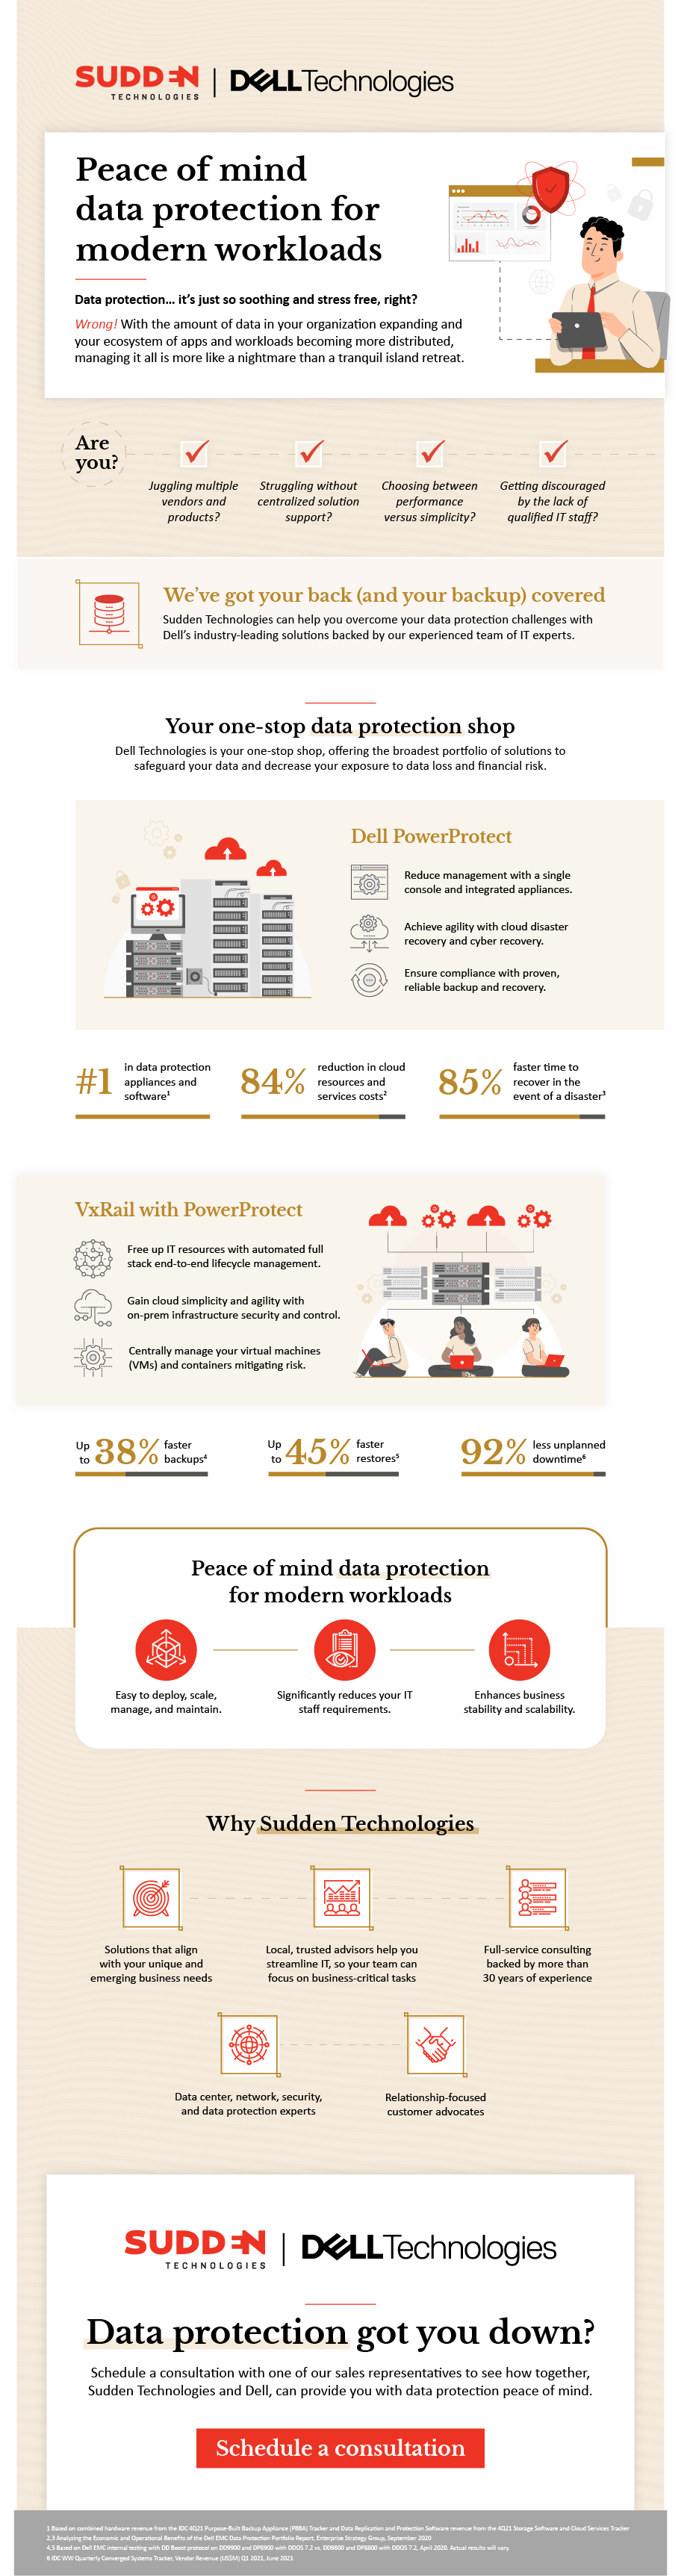 Sudden Technologies Dell Data Protection long scrolling infographic with flat illustrations, line icons and used primarily Tan and White colors, with a pop of Red